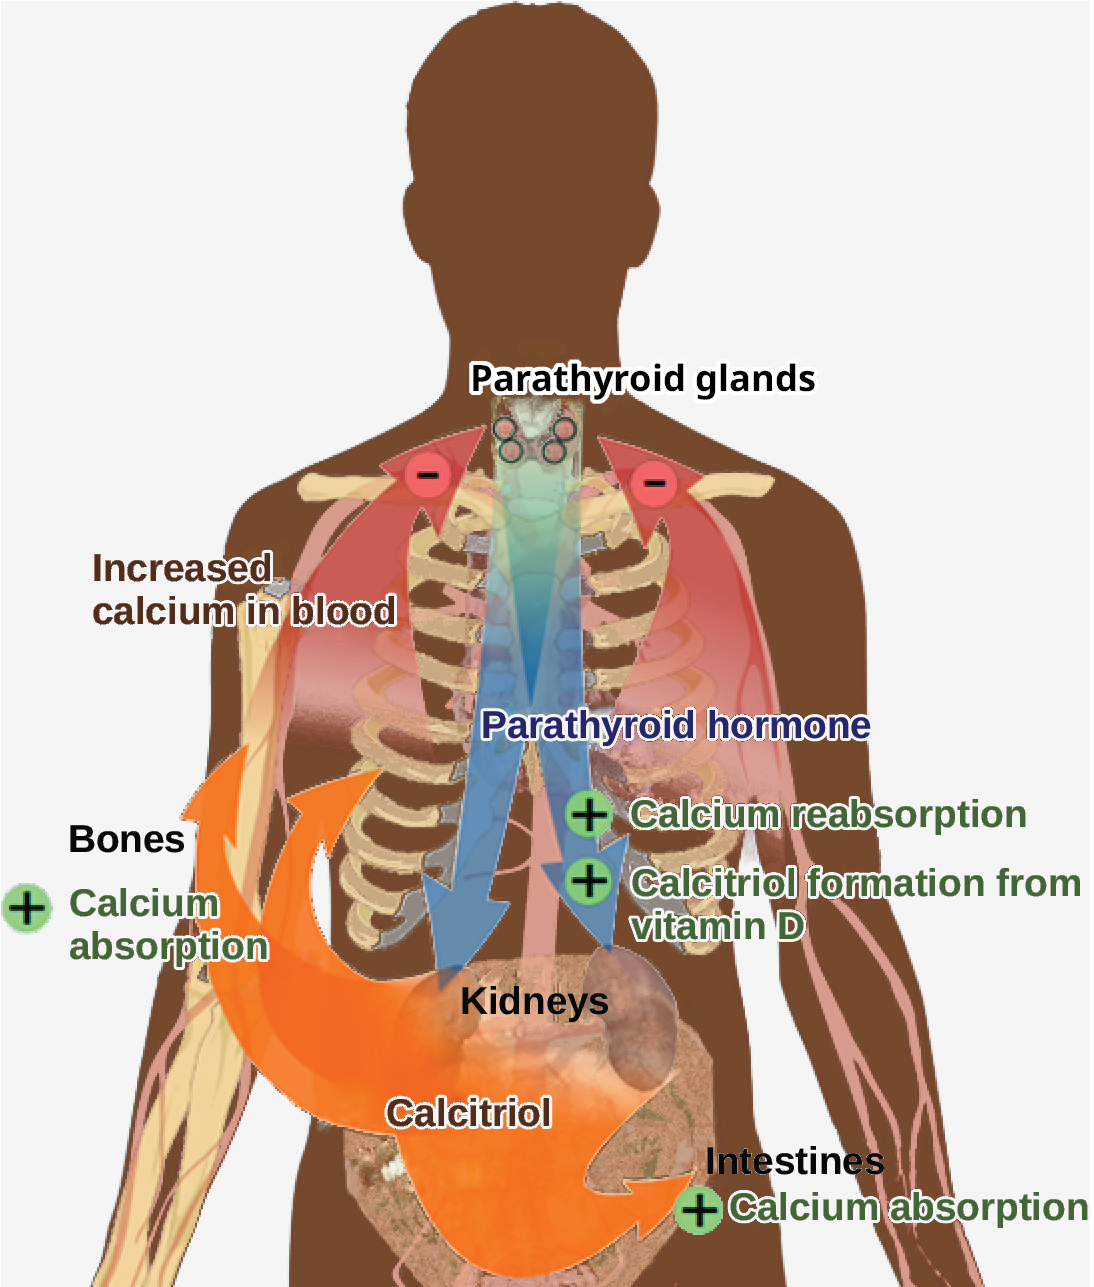 The parathyroid glands, which are located in the neck, release parathyroid hormone, or P T H. P T H causes the release of calcium from bone and triggers the reabsorption of calcium from the urine in the kidneys. P T H also triggers the formation of calcitriol from vitamin D. Calcitriol causes the intestines to absorb more calcium. The result is increased calcium in the blood.